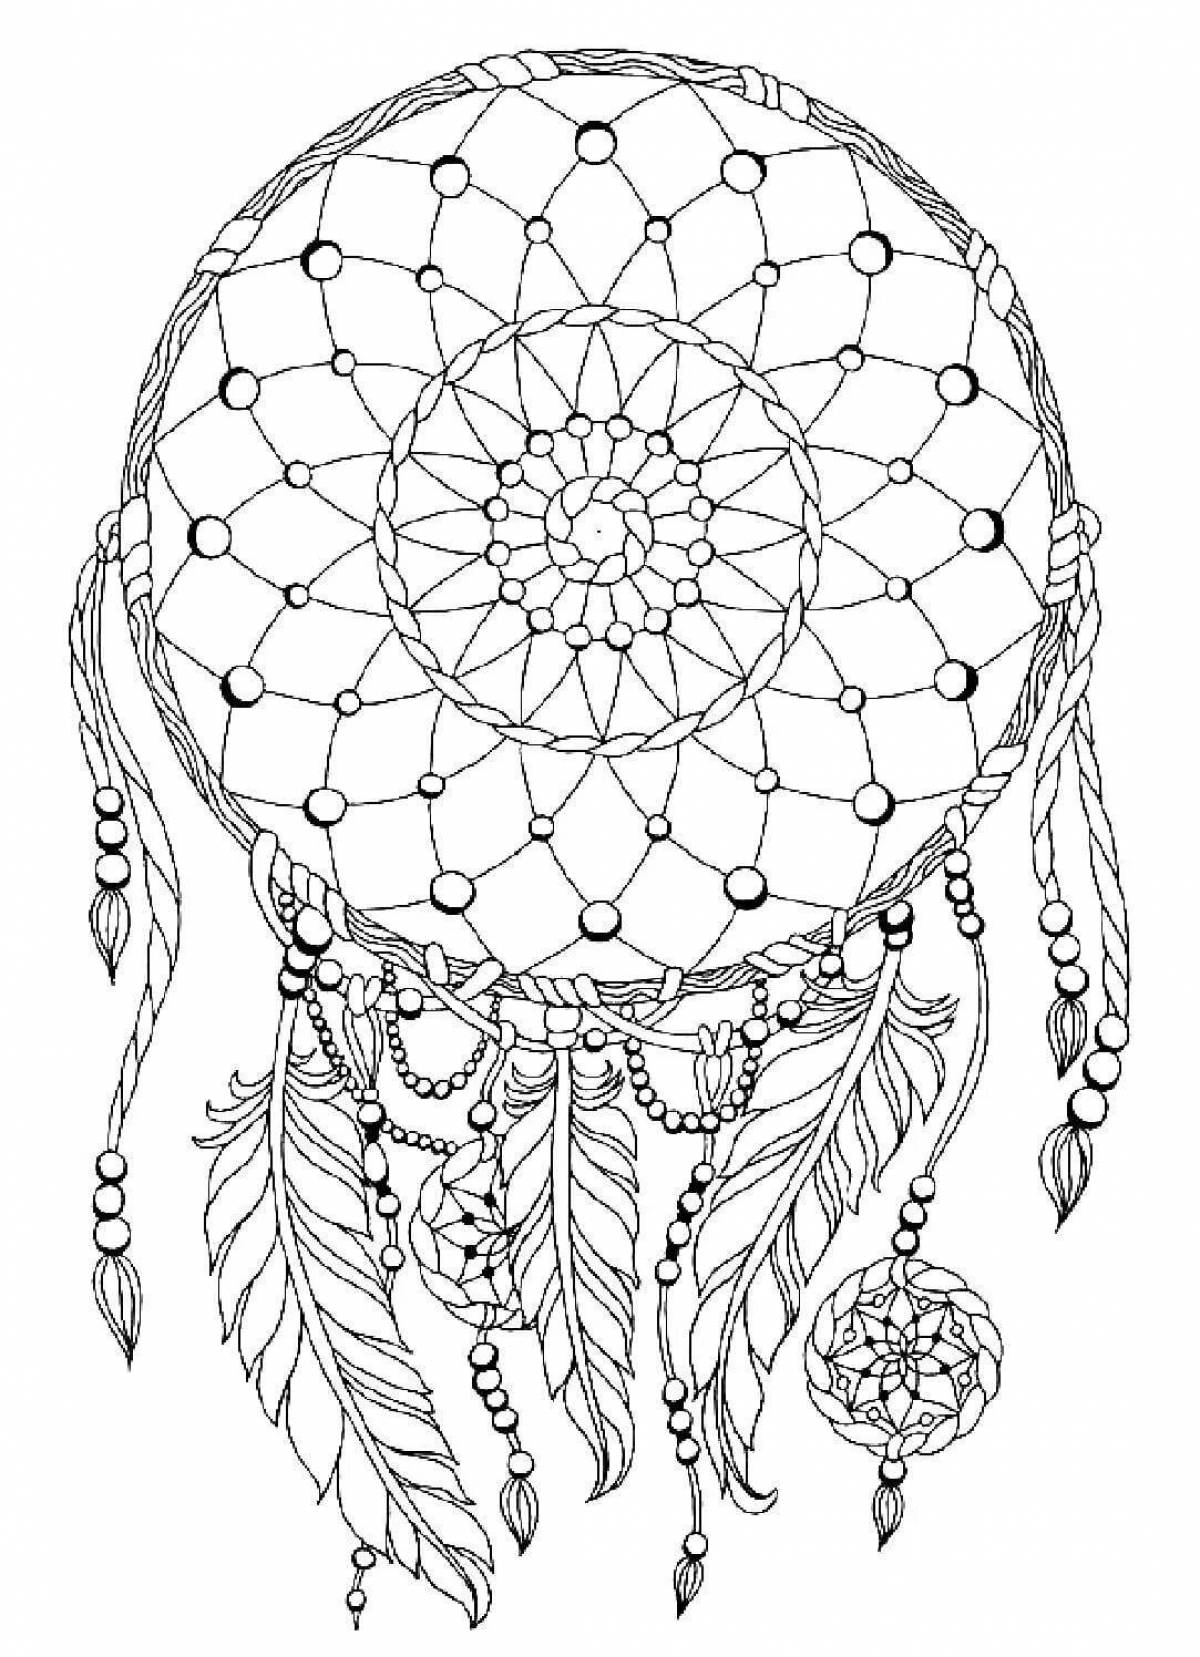 Spicy coloring antistress dream catcher